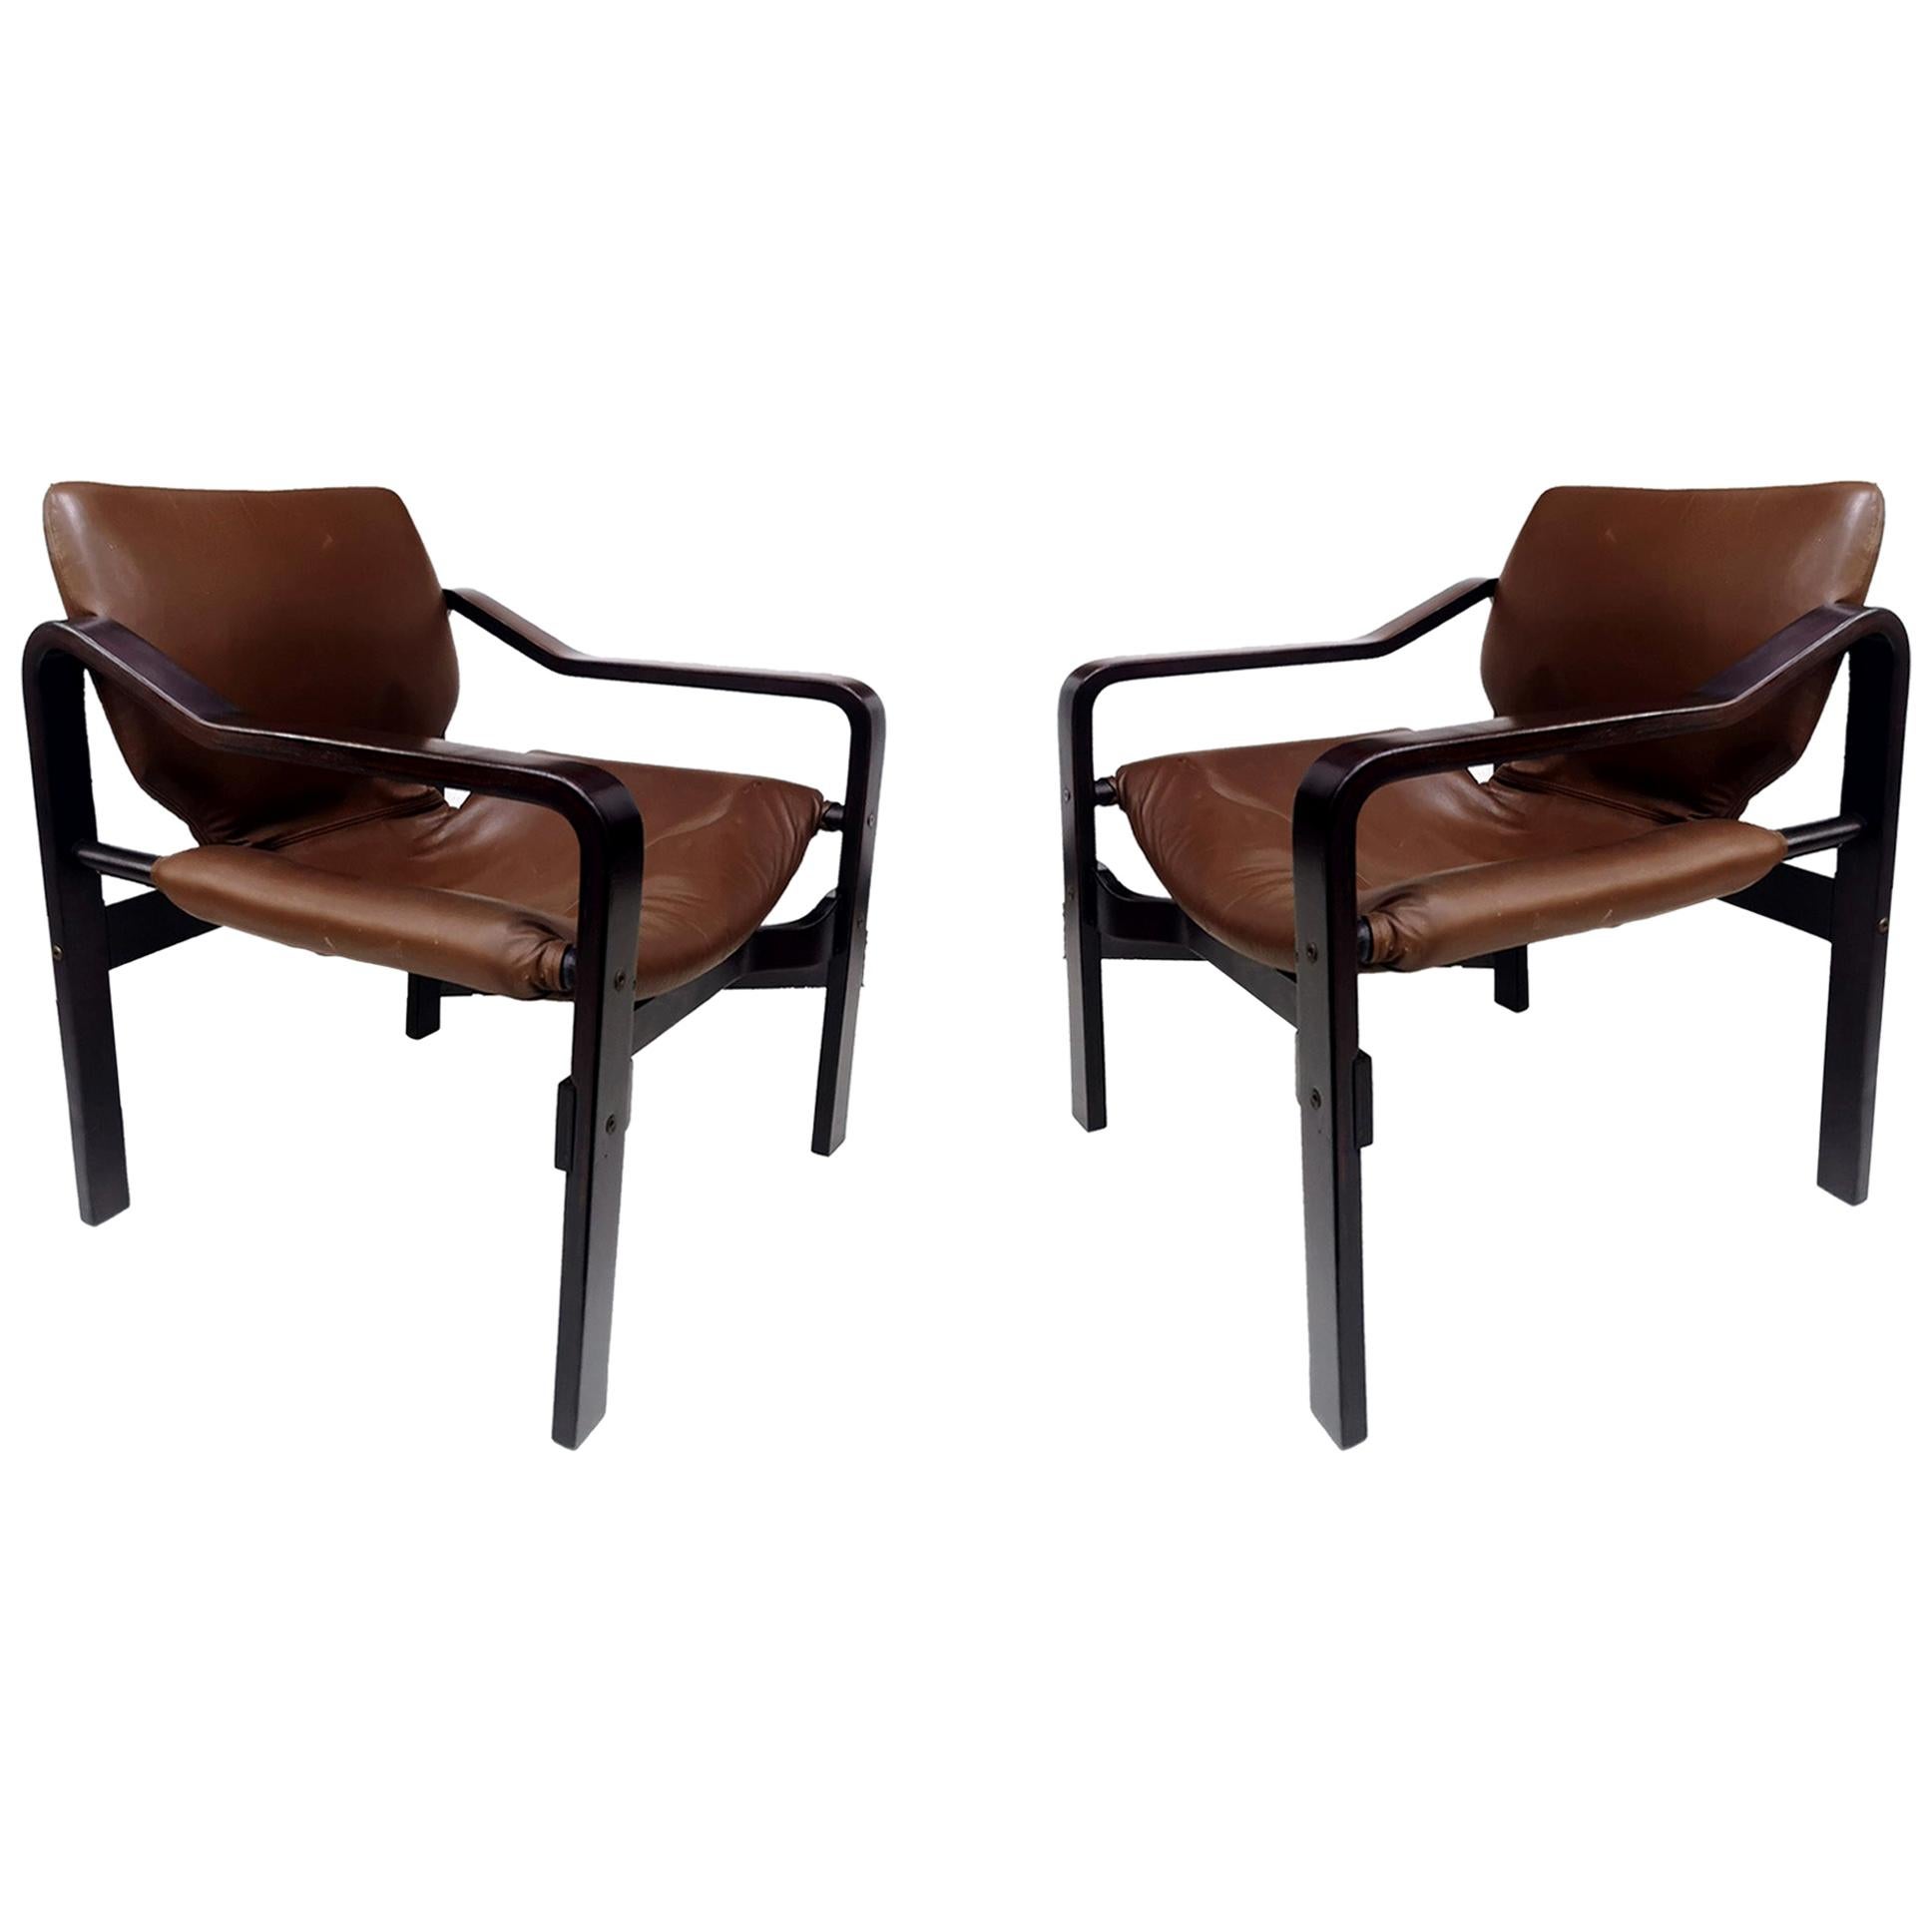 Set of Two Mid-Century Plywood Leather Arm Chairs, 1970s For Sale